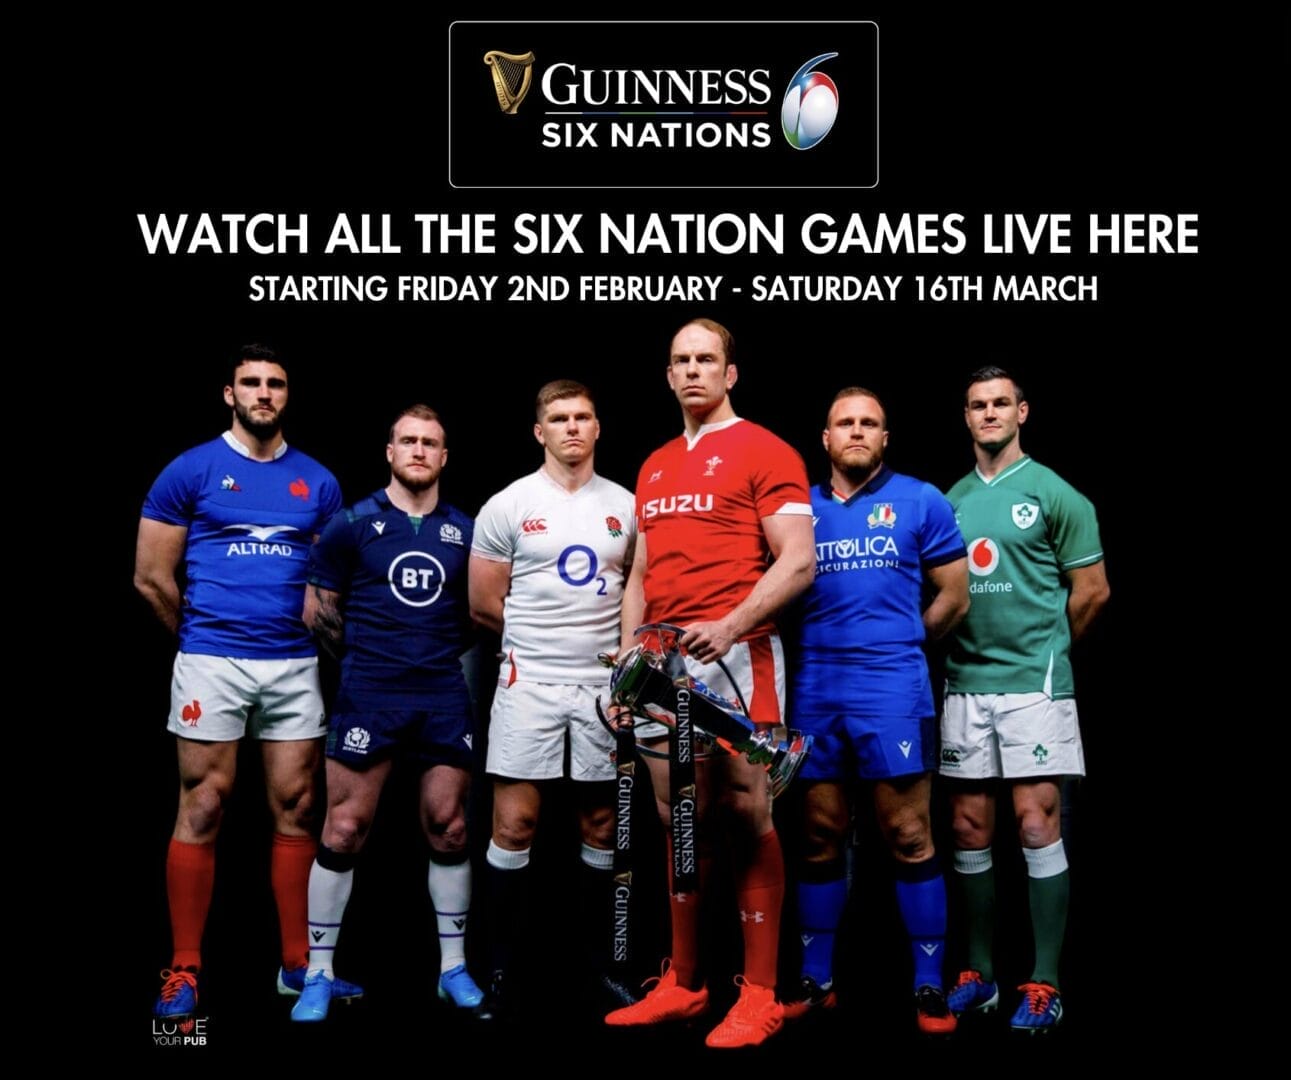 Pubs In Gosport Showing Rugby - Watch At The Market House Tavern !